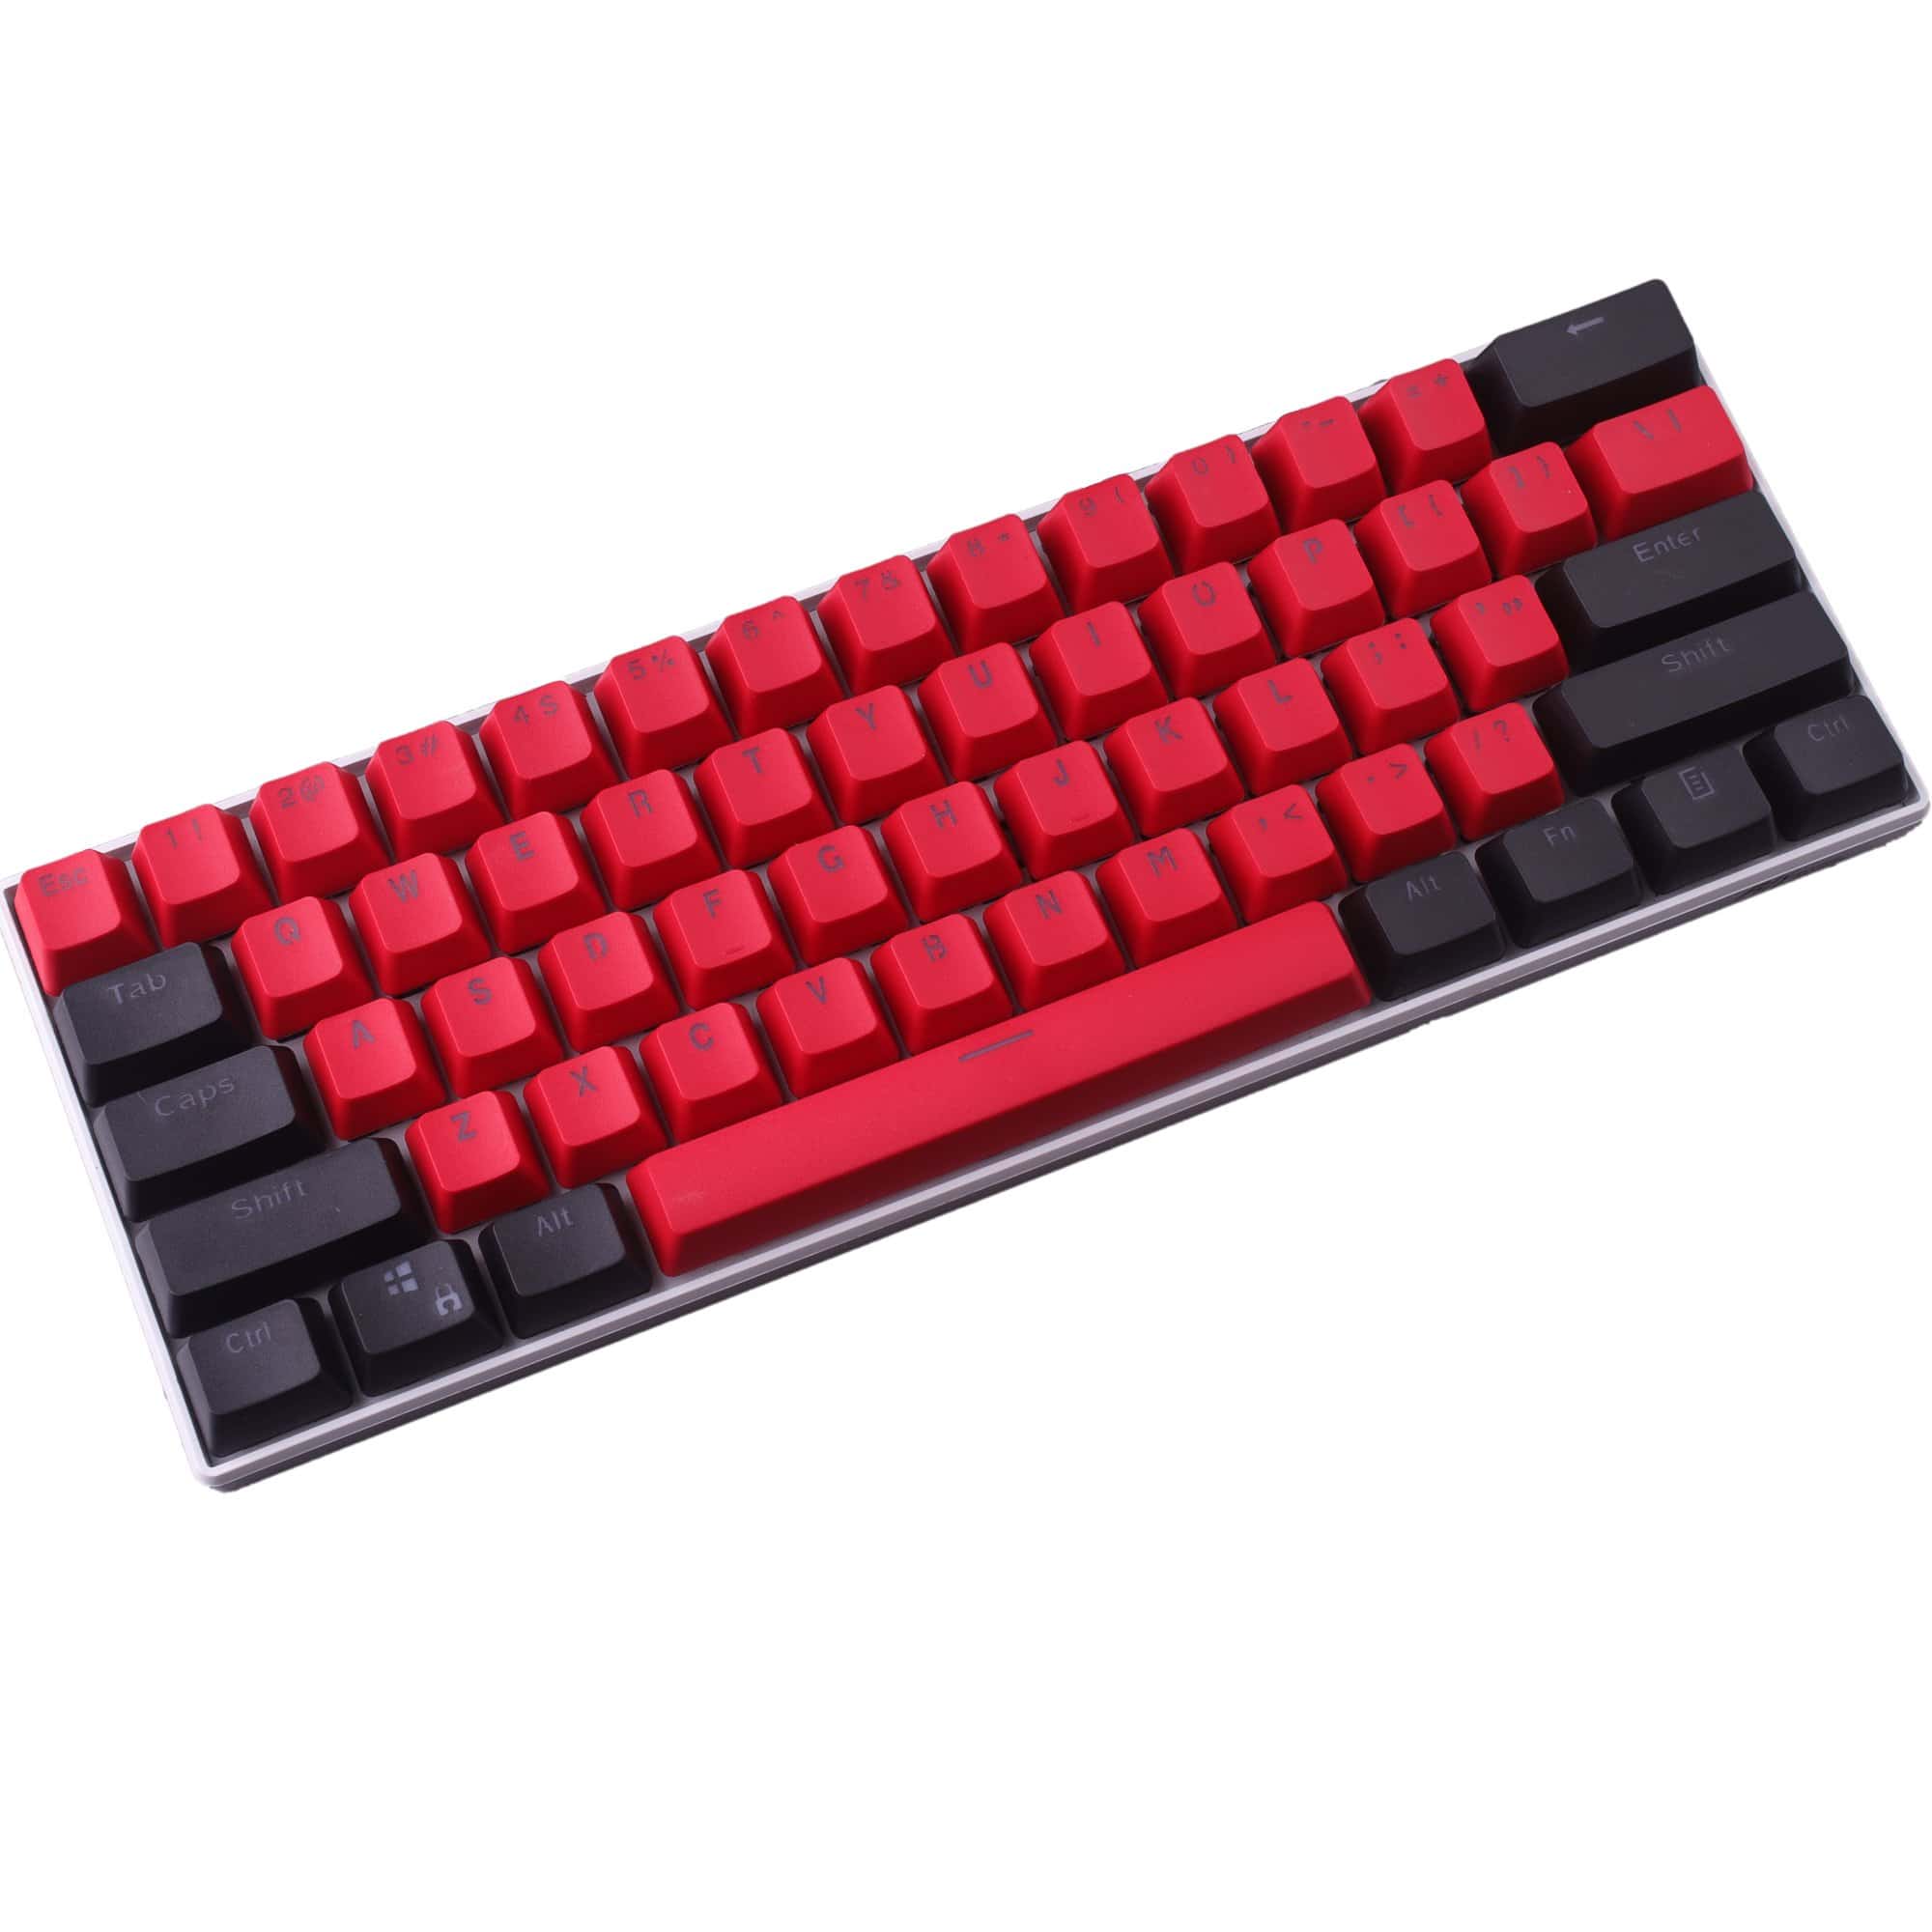 Keycaps Backlight for US Layout Mechanical Keyboard